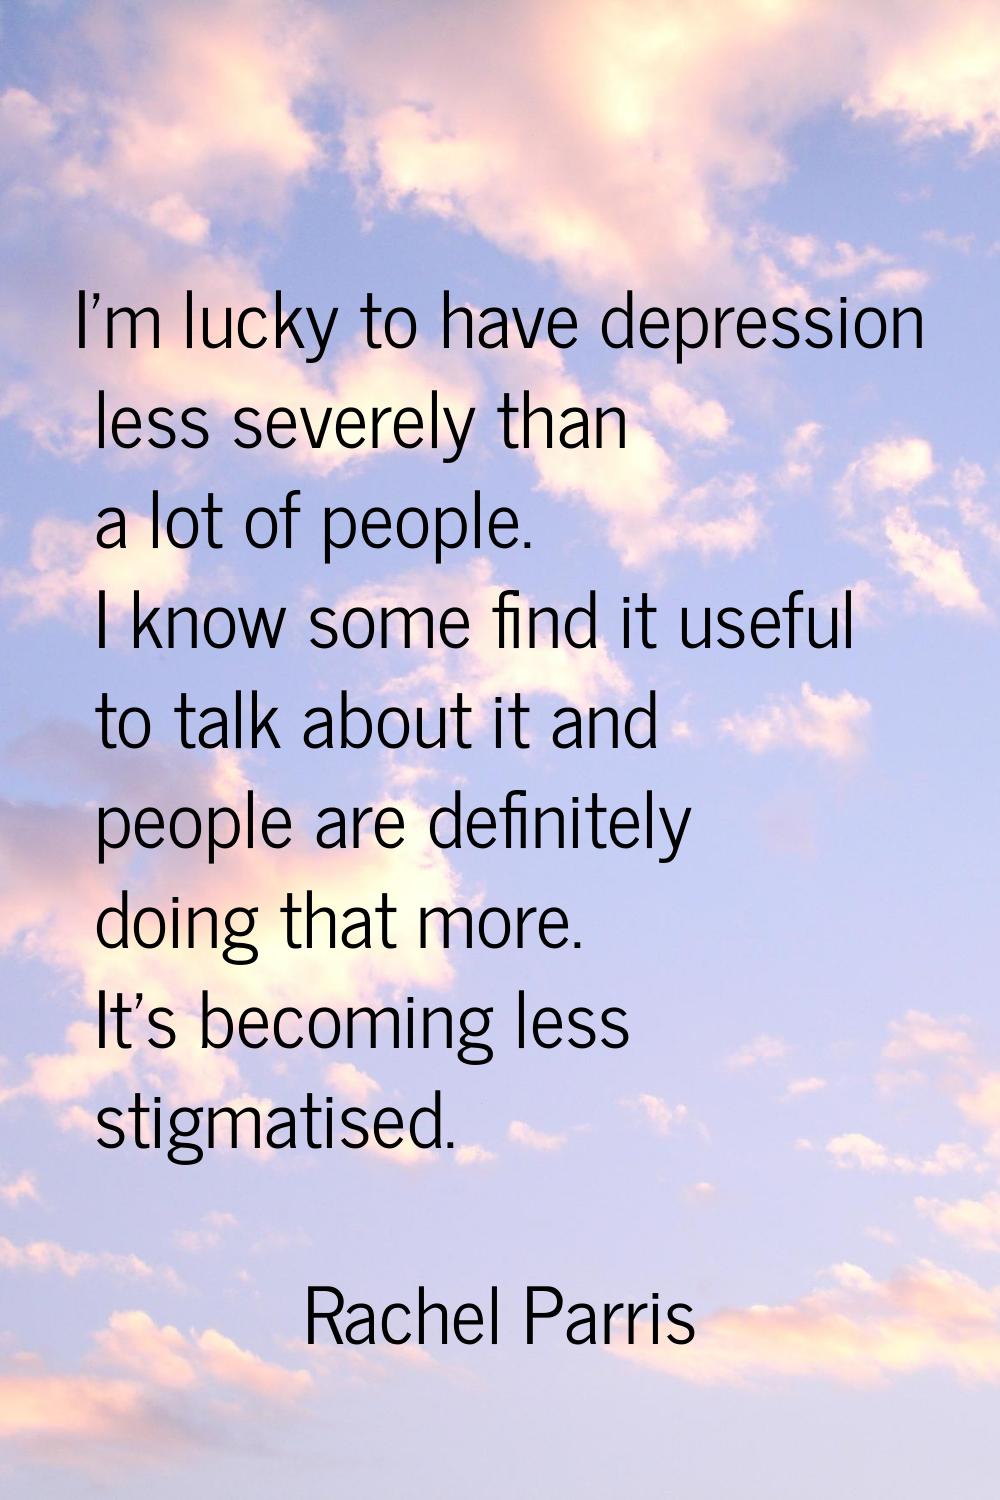 I’m lucky to have depression less severely than a lot of people. I know some find it useful to talk